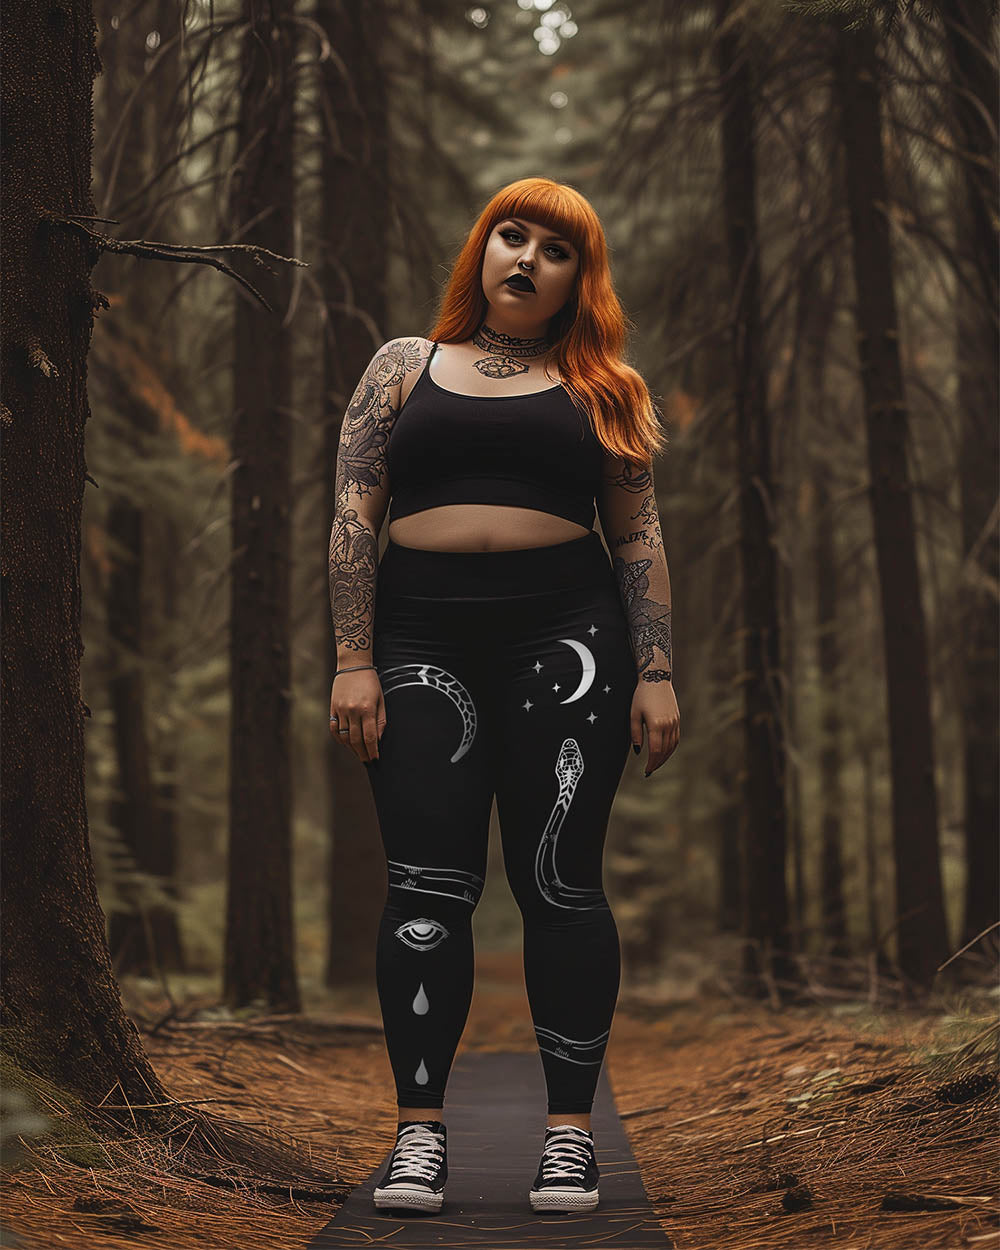 Snake Guardians Plus Size Leggings - UPF 50+ Protection Vegan Witchy Occult  Pagan Style Activewear - Goth Yoga Leisurewear